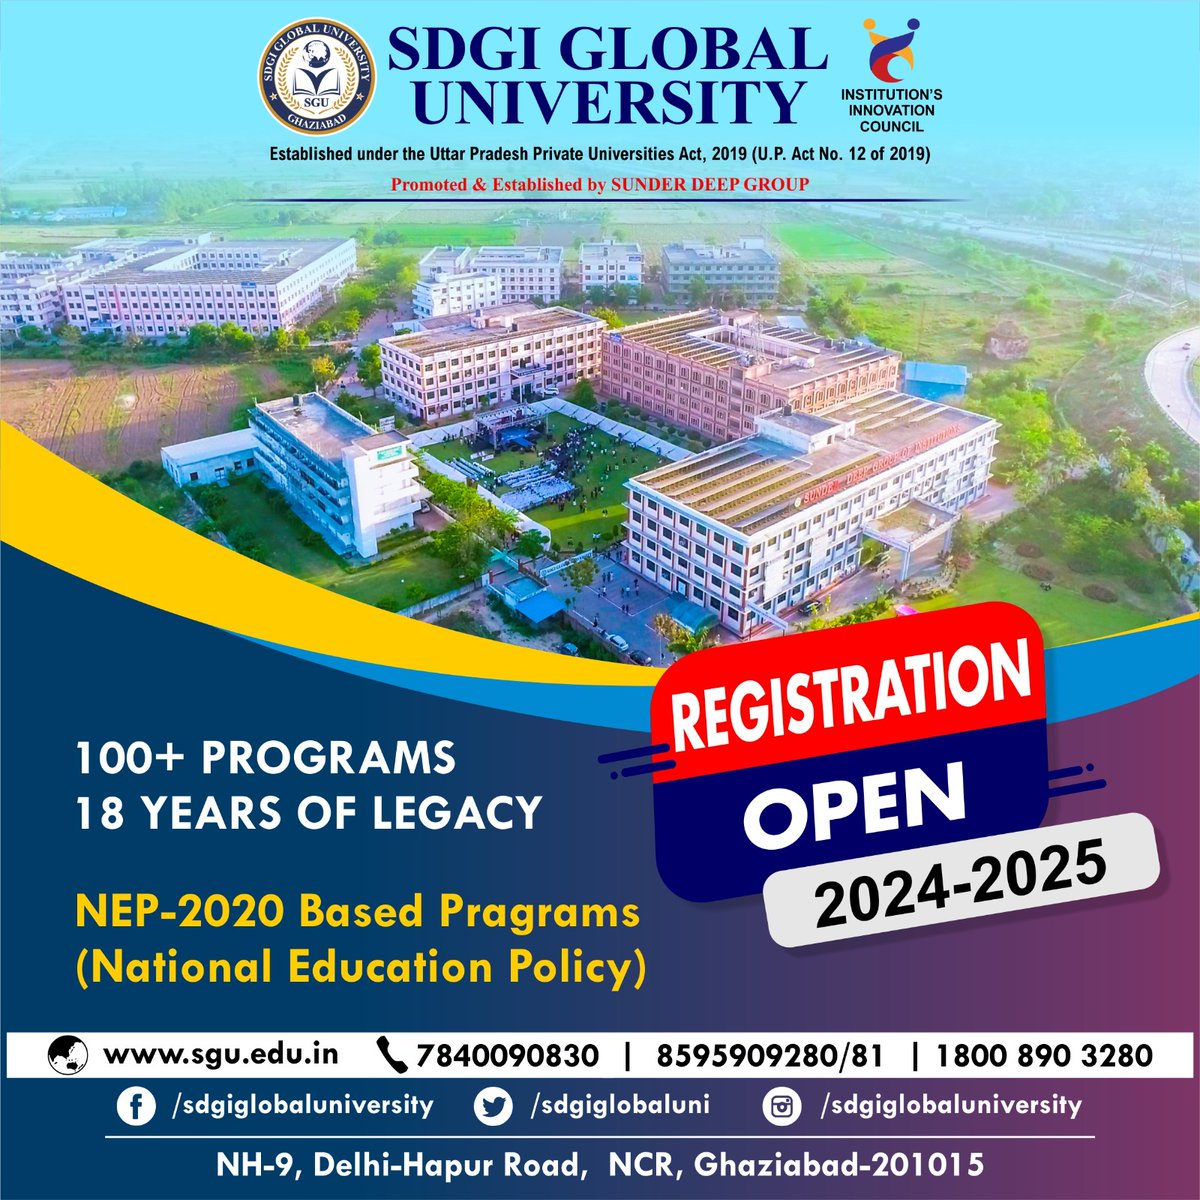 👩‍🎓Registration Open 2024-25 Session 
#SDGIGlobalUniversity #NEP2020 #EducationForAll #AcademicExcellence #FutureLeaders #ExploreYourPotential #HigherEducation #LegacyofLearning
#SkillIndia #CampusNews #UPGovt #GhaziabadNews #AajTakLive  #News24 #ZeeNews  #Admissions2024 #Research